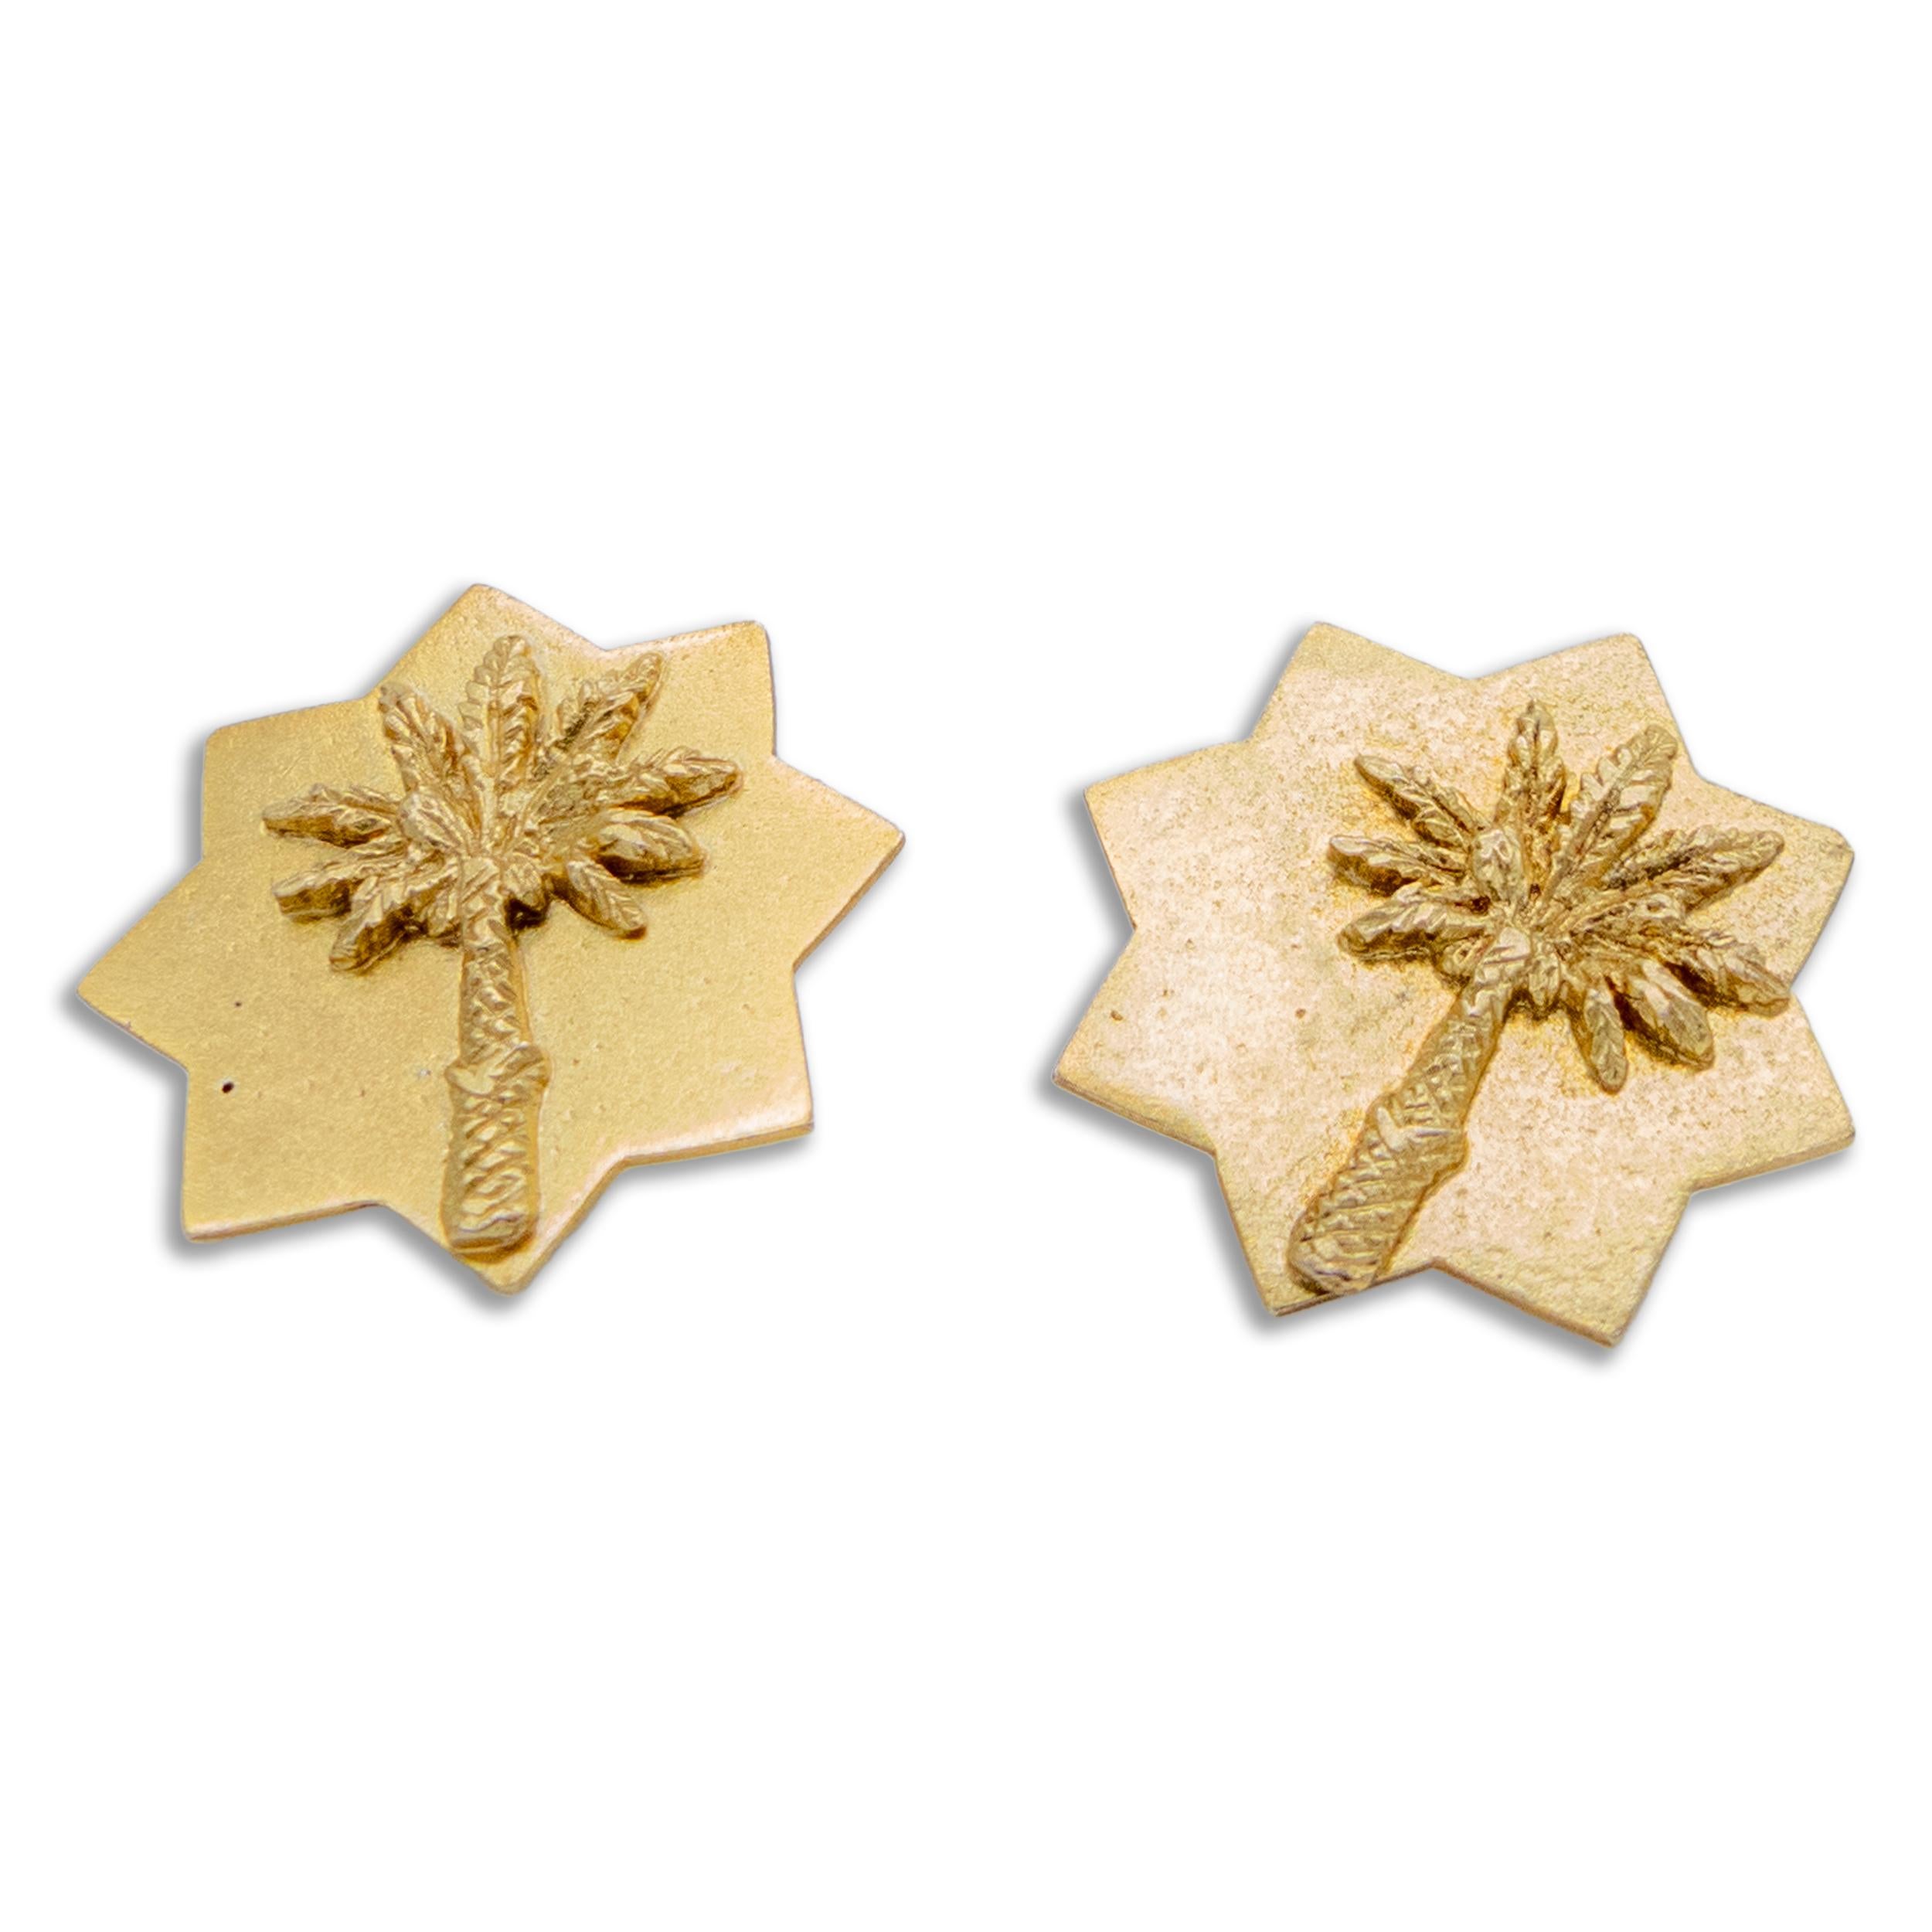 21st Century Silver Gold Plated Palm Tree 8 Pointed Star Stud Earrings

Stud earrings in the shape of an 8-pointed star and central palm tree in gold plated silver. 

This piece is an ‘Art Jewel’ which has a great respect for tradition. The usage of